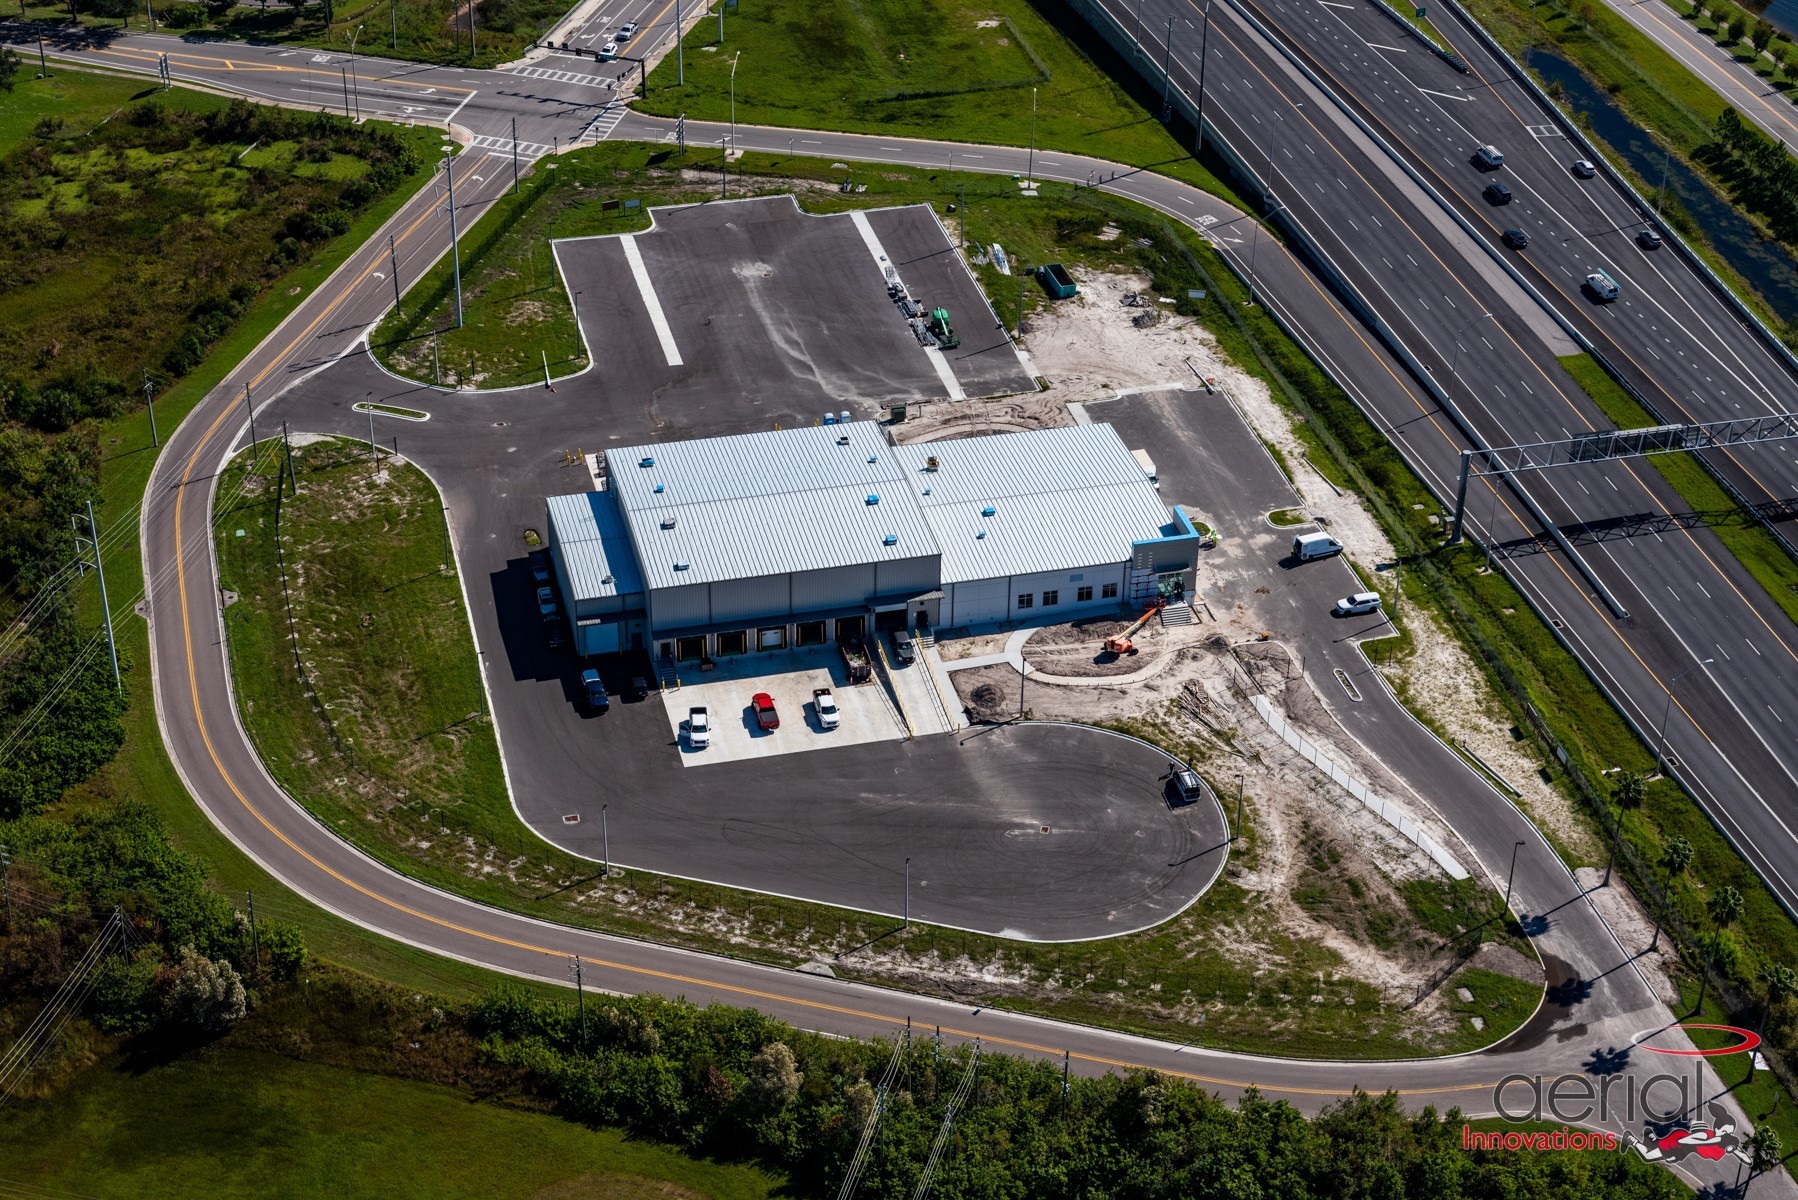 An aerial view of Coke Florida's new St. Pete sales and distribution center, which opened on Wednesday, Dec. 14. (Courtesy photo)